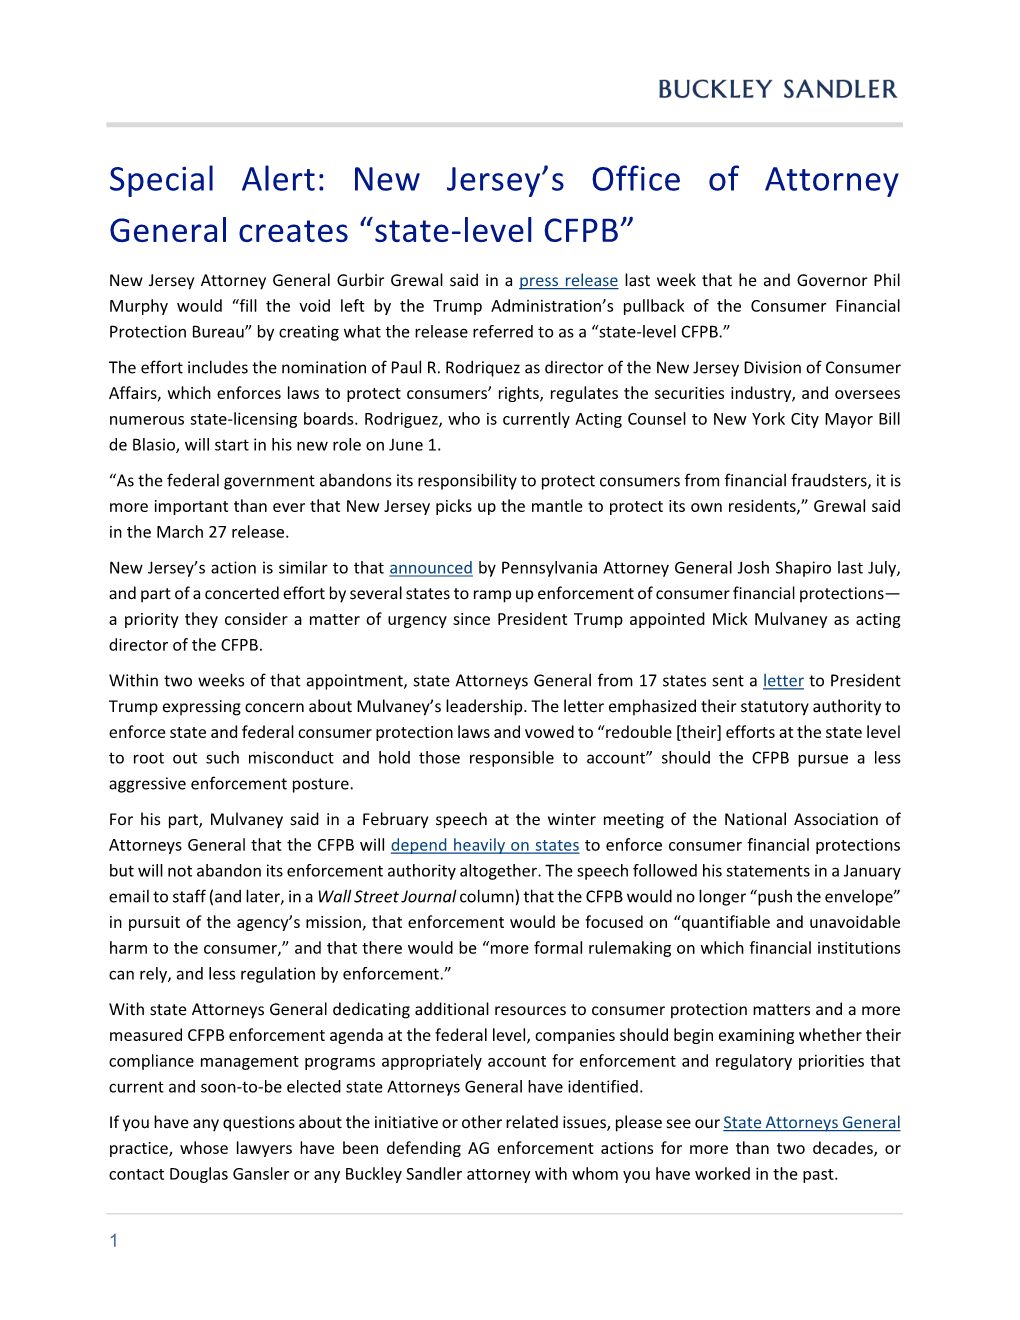 Special Alert: New Jersey's Office of Attorney General Creates “State